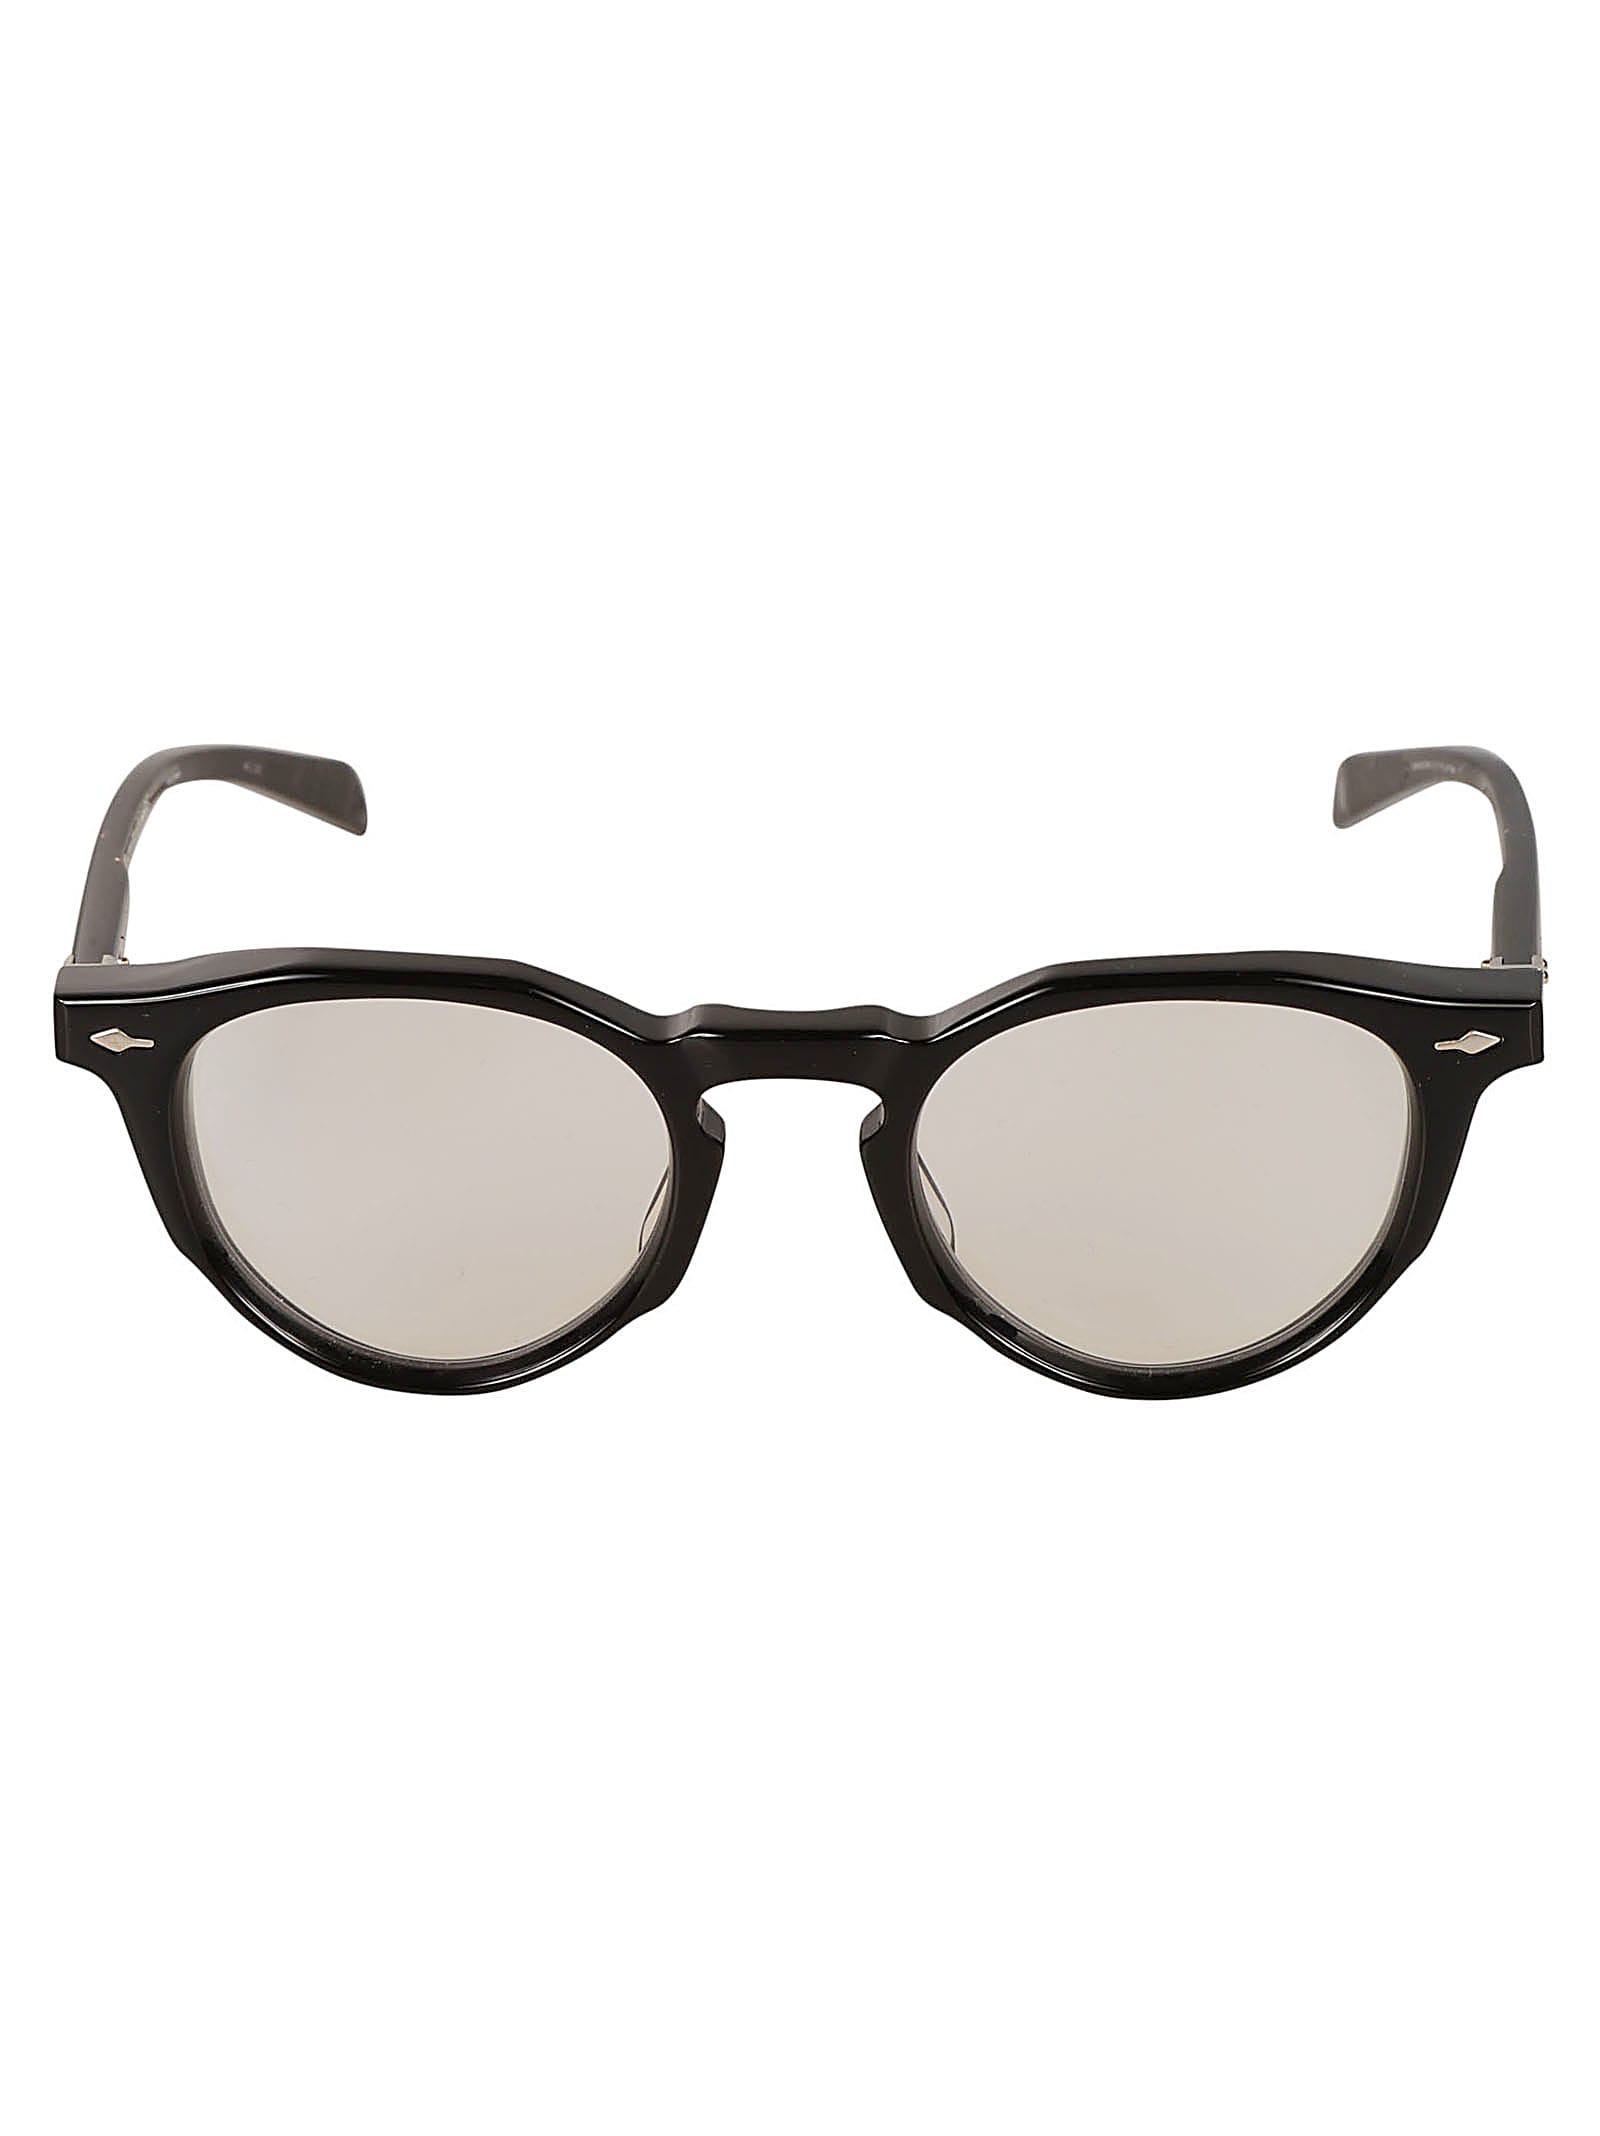 jacques marie mage sheridan frame glasses